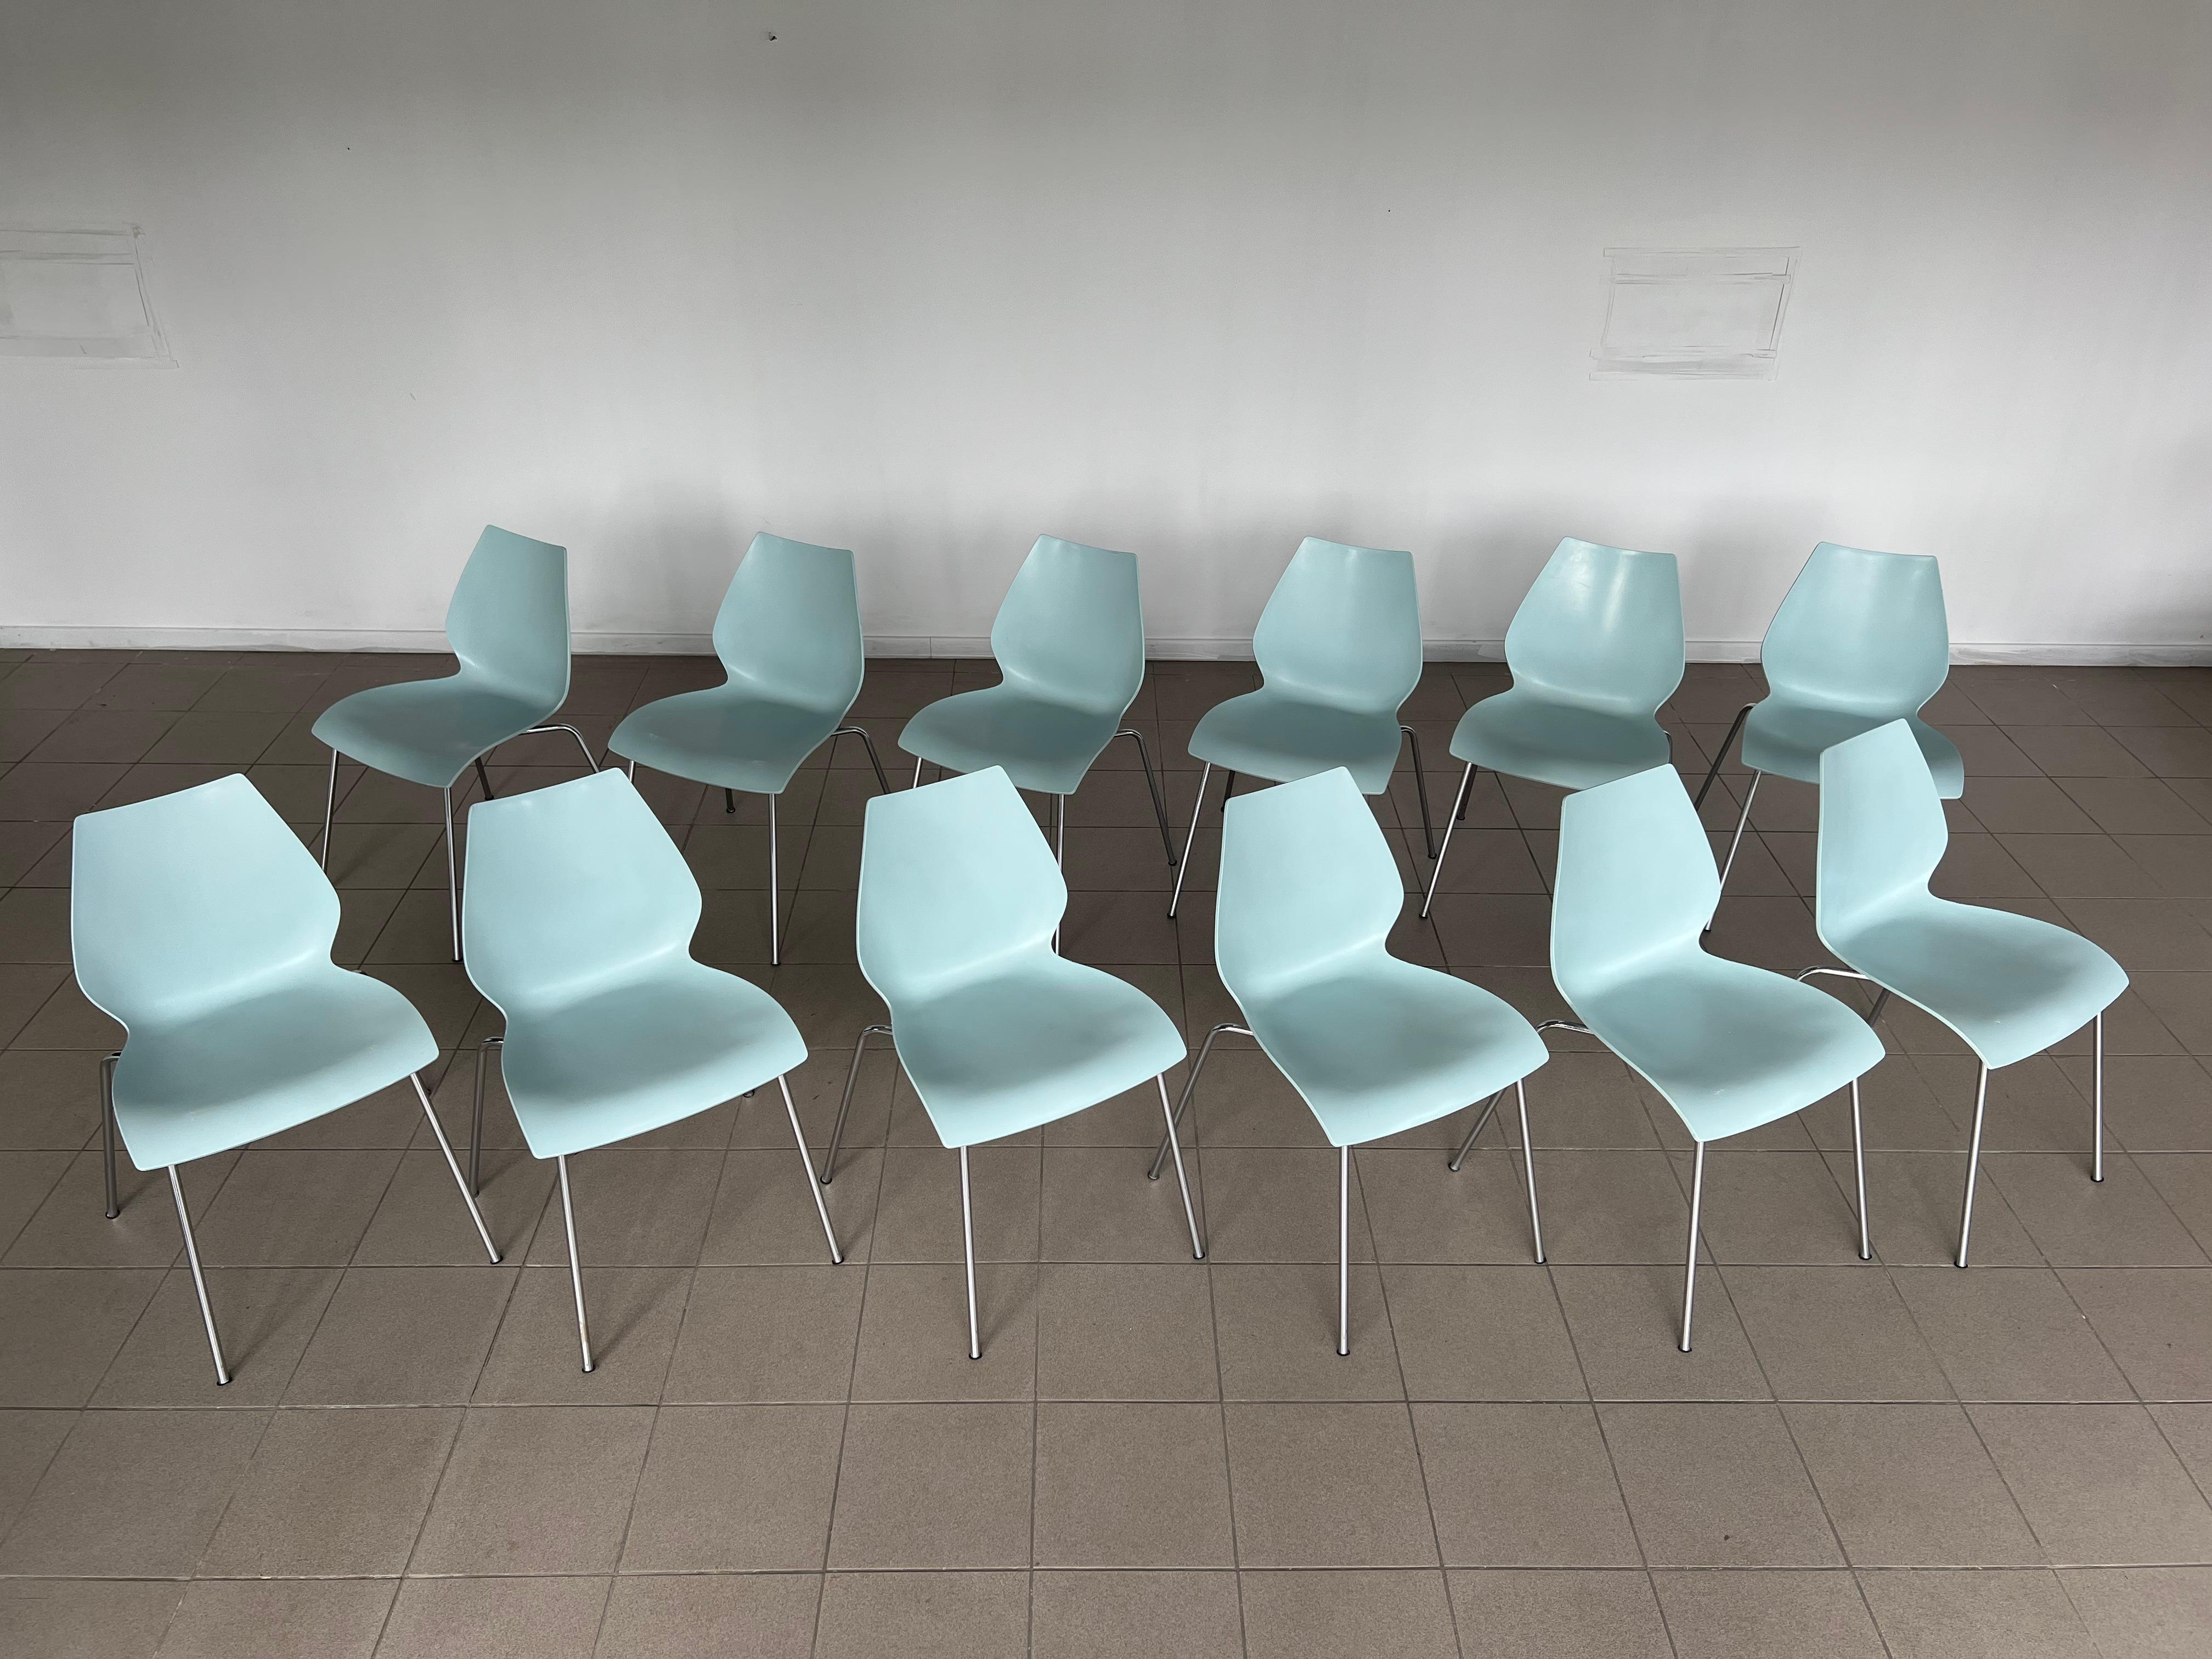 Late 20th Century Italian Maui Pale Blue Side Chairs Vico Magistretti for Kartell - Set of 12 For Sale